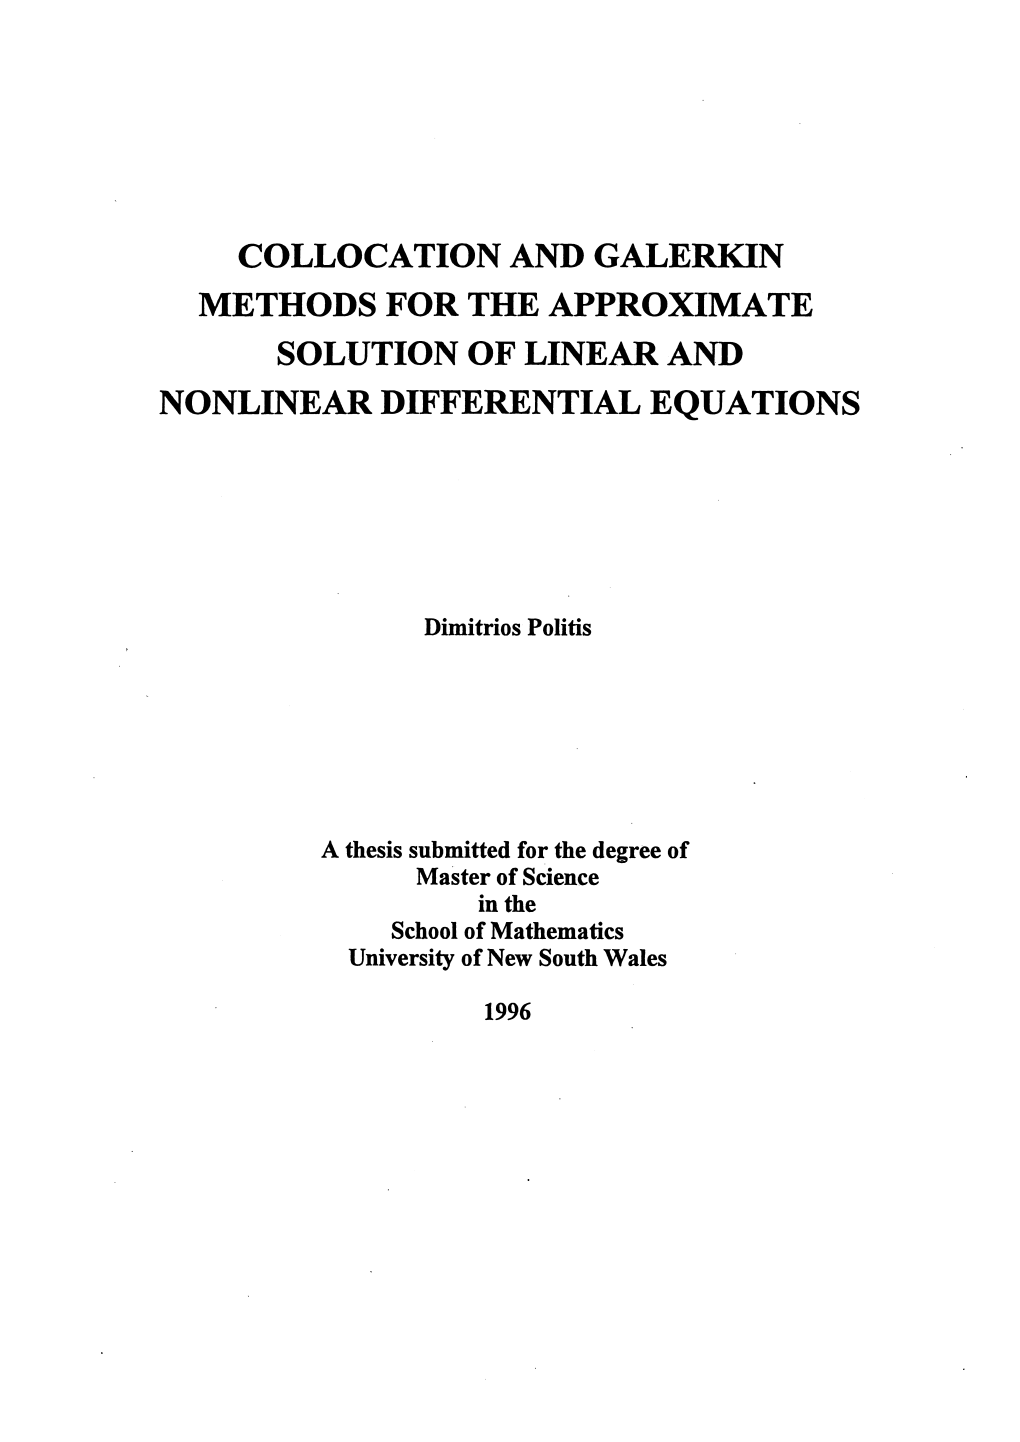 Collocation and Galerkin Methods for the Approximate Solution of Linear and Nonlinear Differential Equations